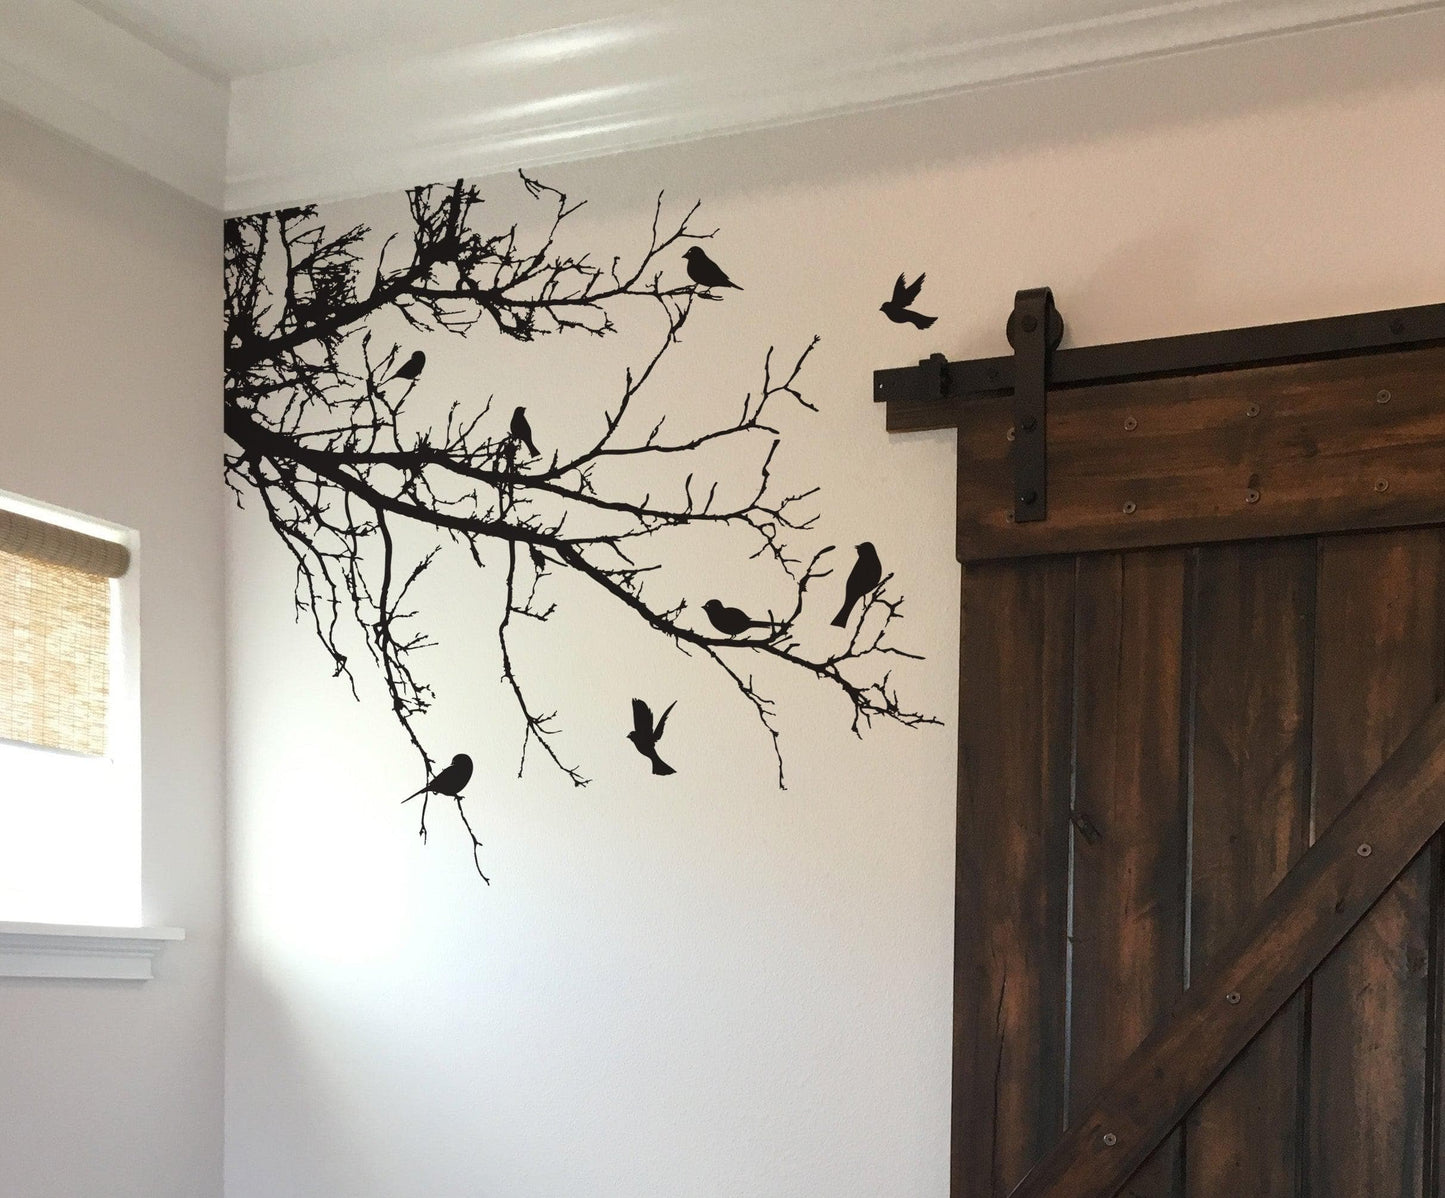 Black decal of 8 birds on tree branches on a white wall near a wooden door.